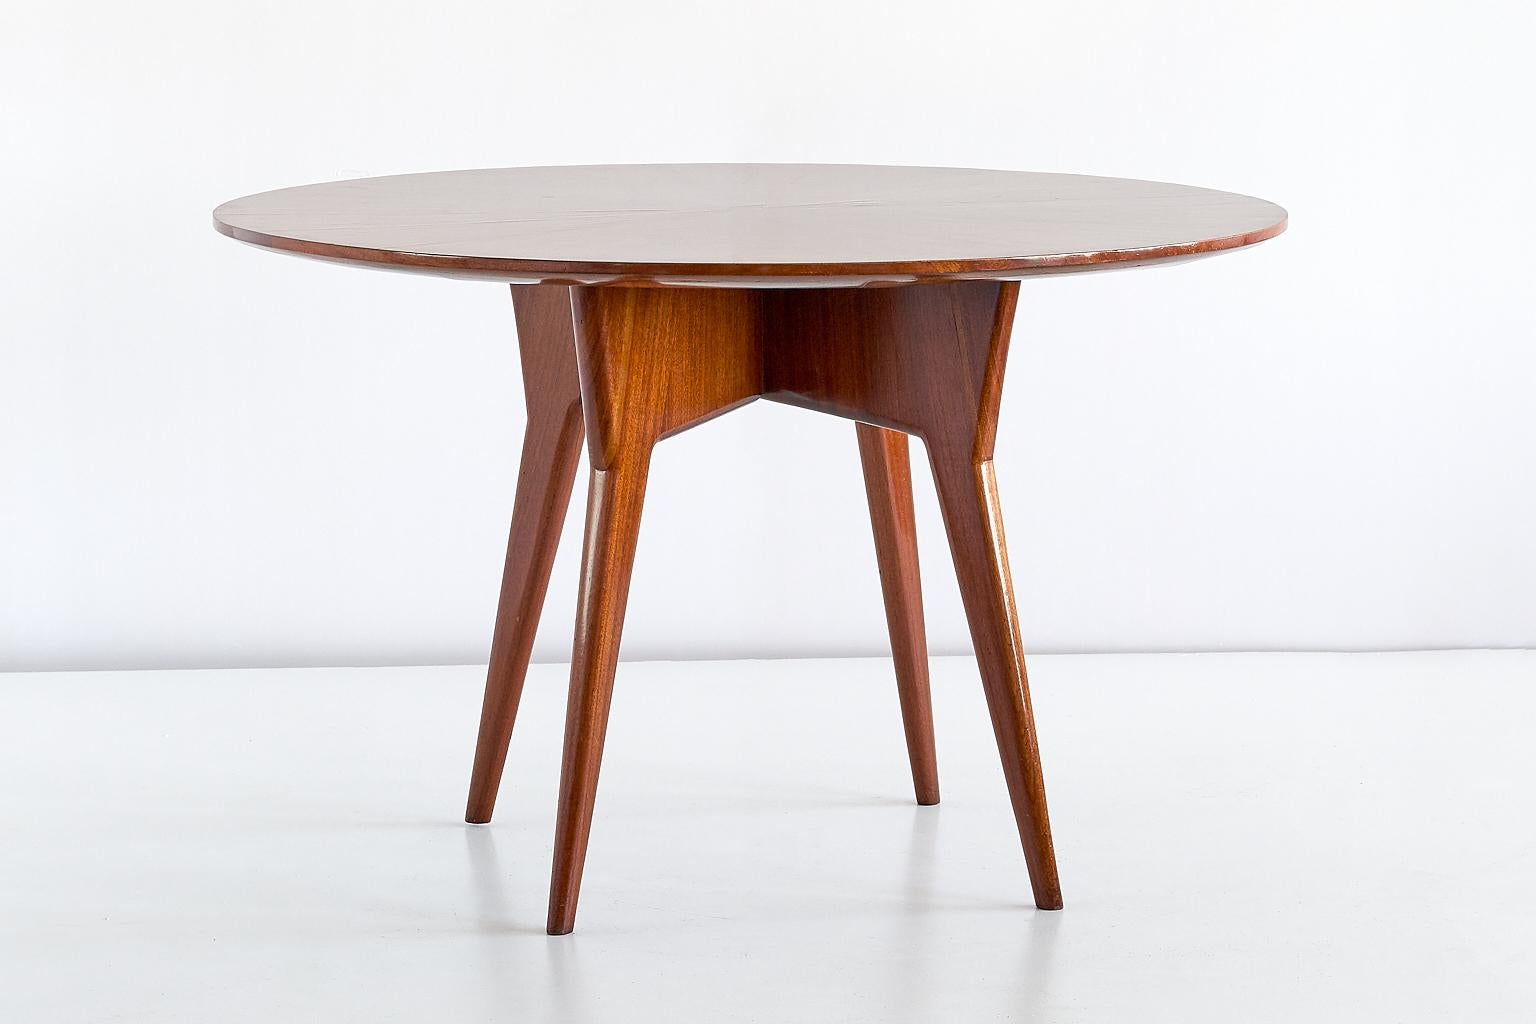 This round dining table was designed by Gio Ponti and manufactured in Italy in the early 1950s. The sculptural frame is executed in solid mahogany and consists of a cross base with 4 legs. The top is made of mahogany as well, with the upper layer